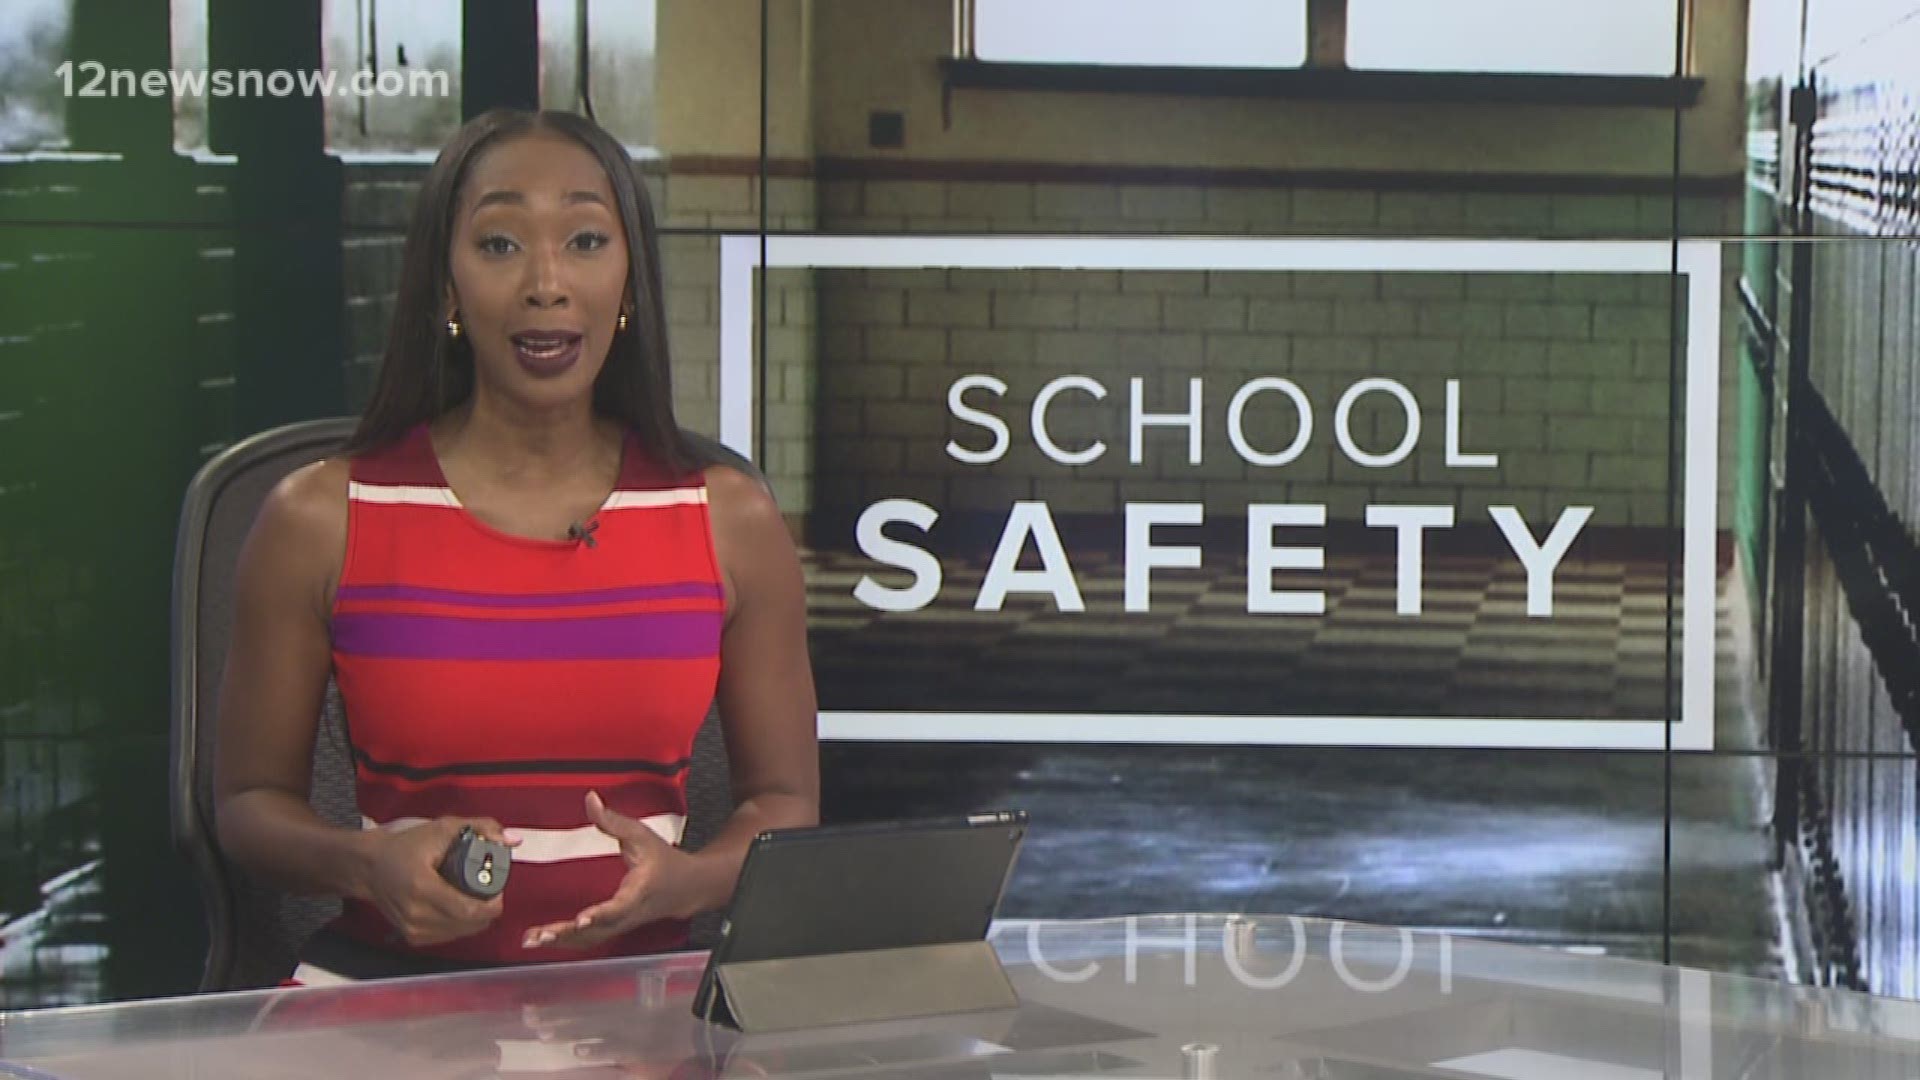 Students at Silsbee Elementary and Laura Reeves Primary School were put on a precautionary lockdown.